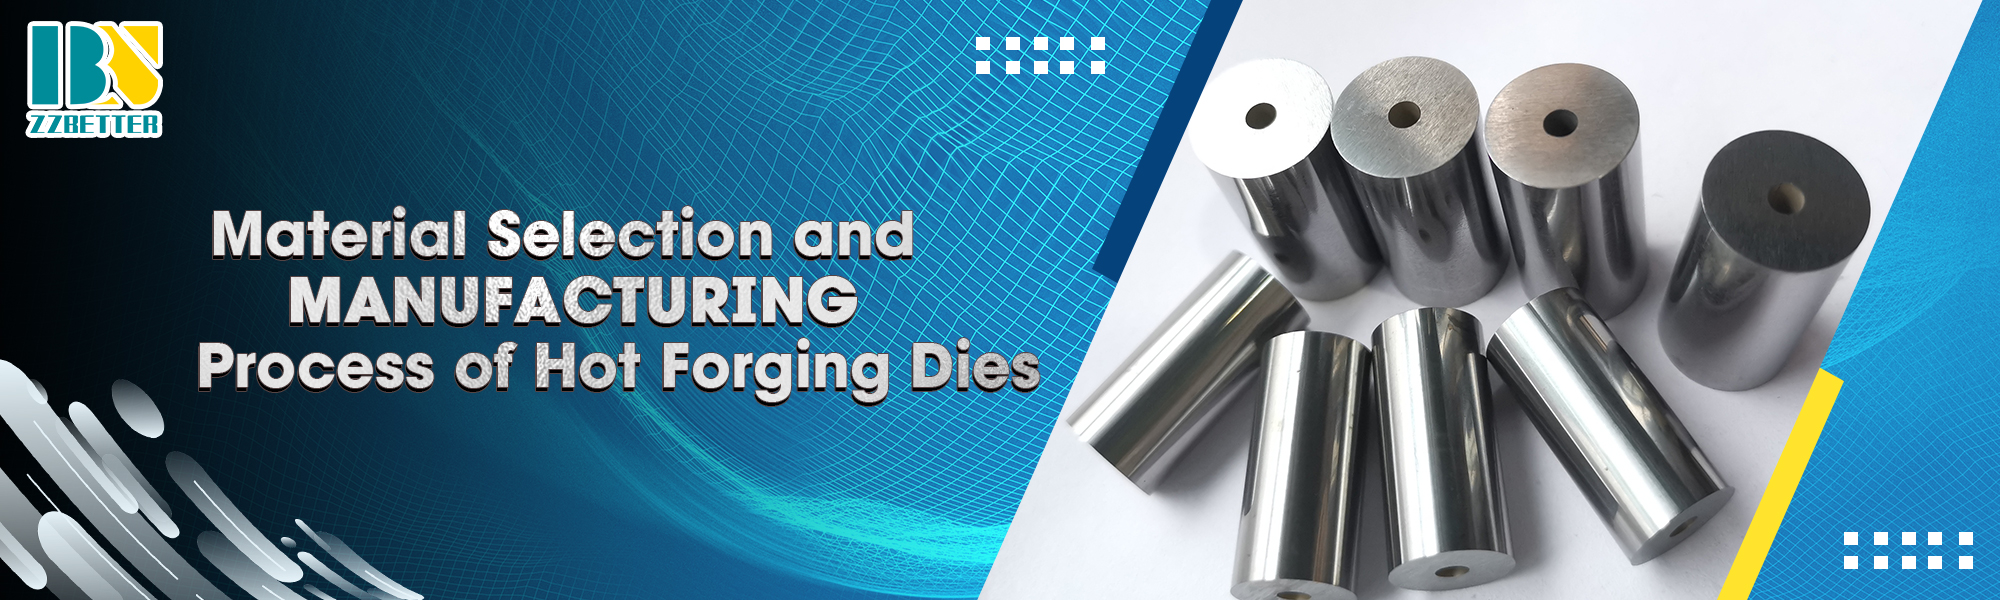 Material Selection and Manufacturing Process of Hot Forging DiesMaterial Selection and Manufacturing Process of Hot Forging Dies